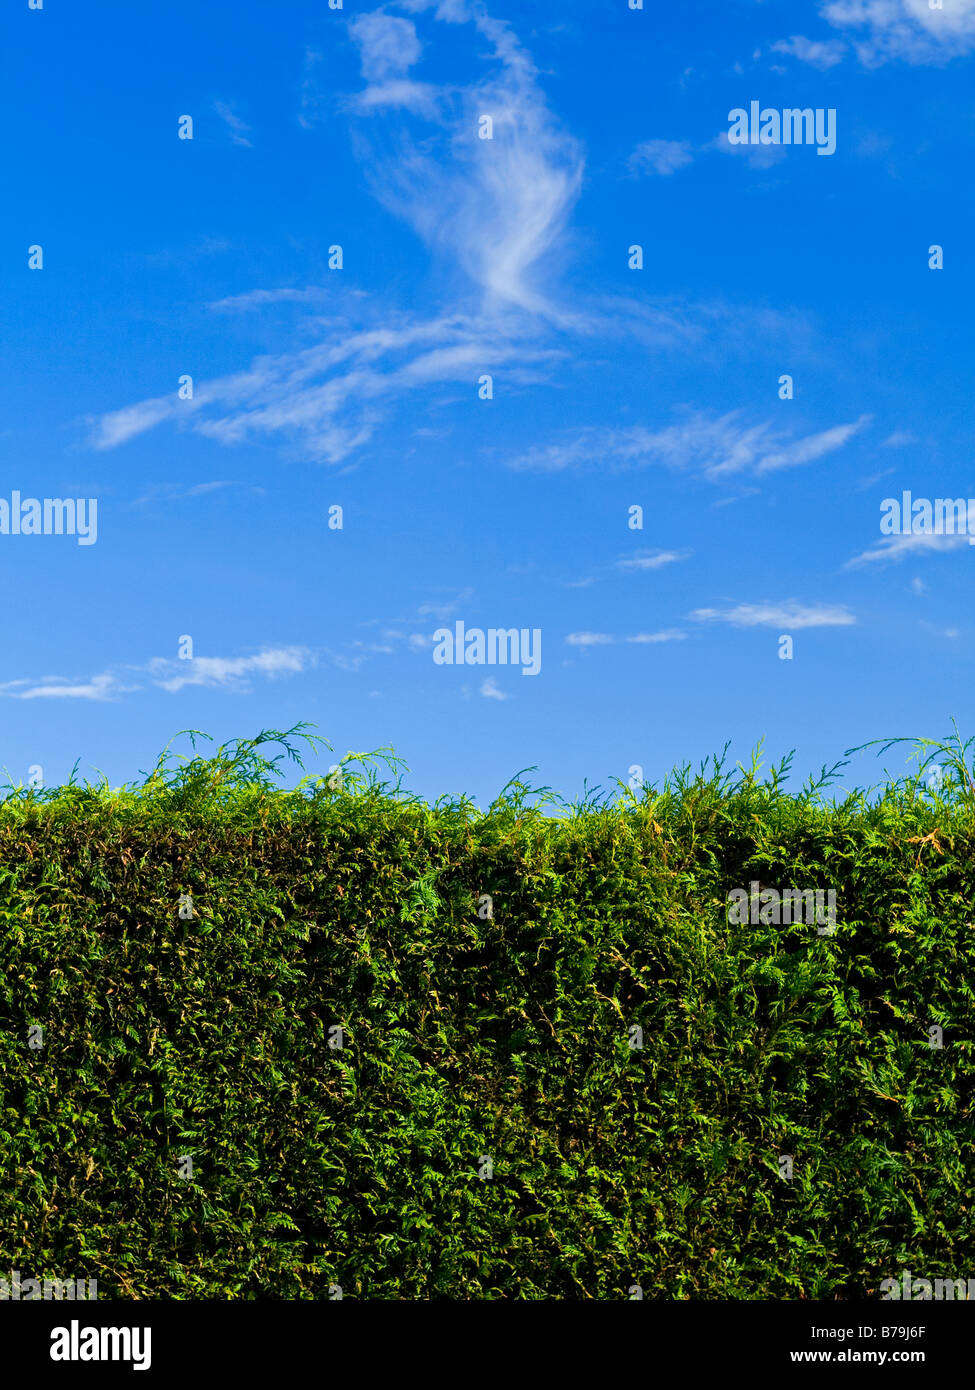 Leylandii hedge shrub with blue sky and cloud behind Stock Photo